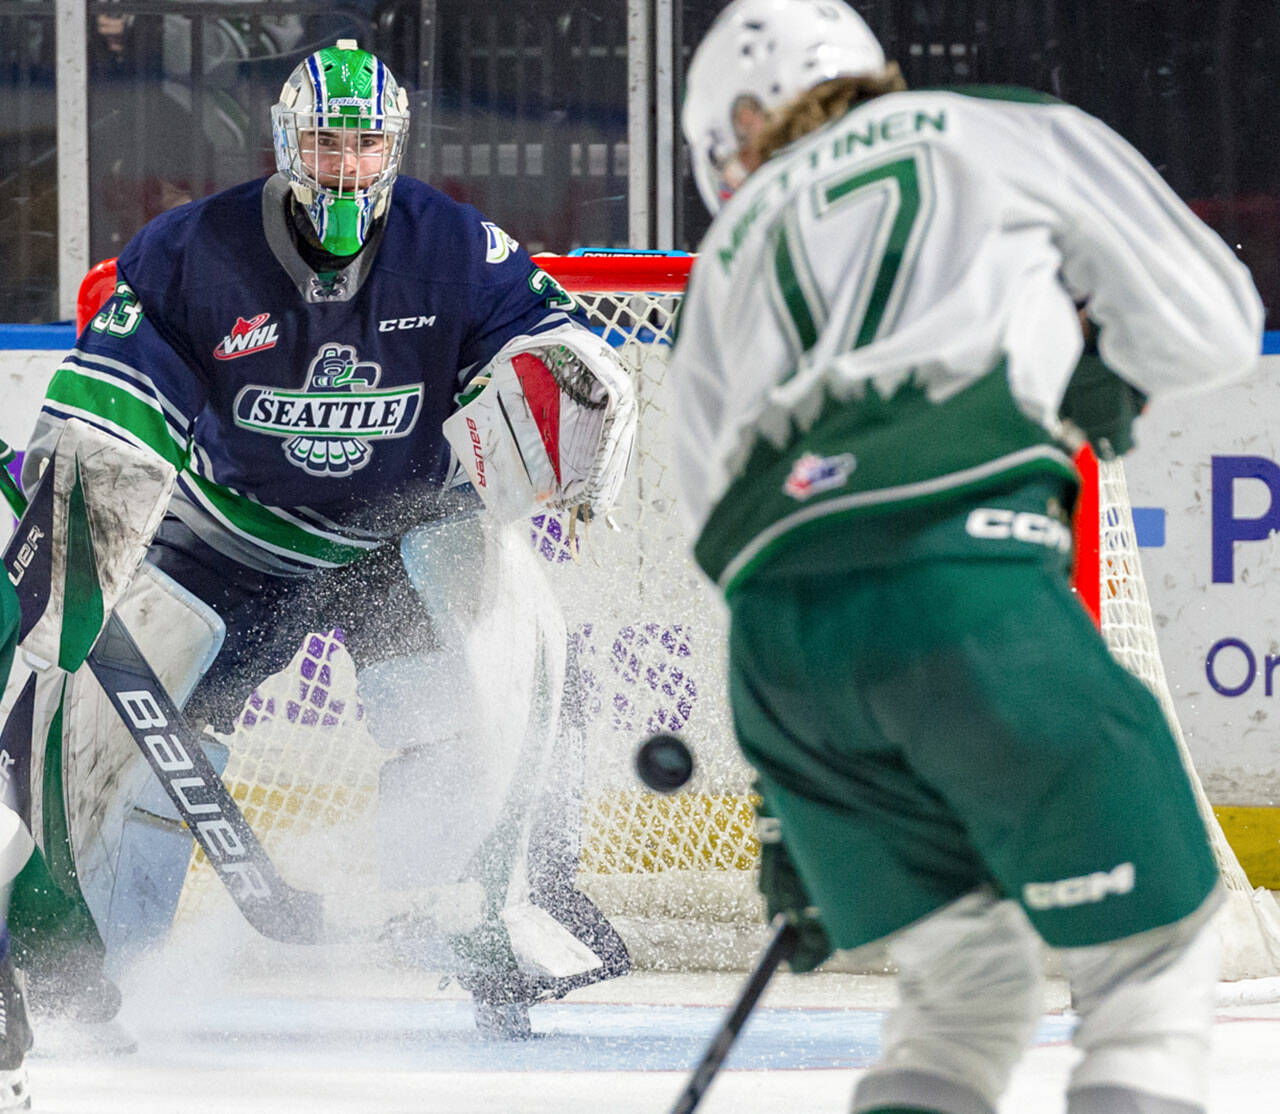 Seattle Thunderbirds goalie Scott Ratzlaff stopped a career high 62 of 63 shots against the Everett Silvertips on Jan. 27 at the accesso ShoWare Center in Kent. COURTESY PHOTO, Brian Liesse, Seattle Thunderbirds